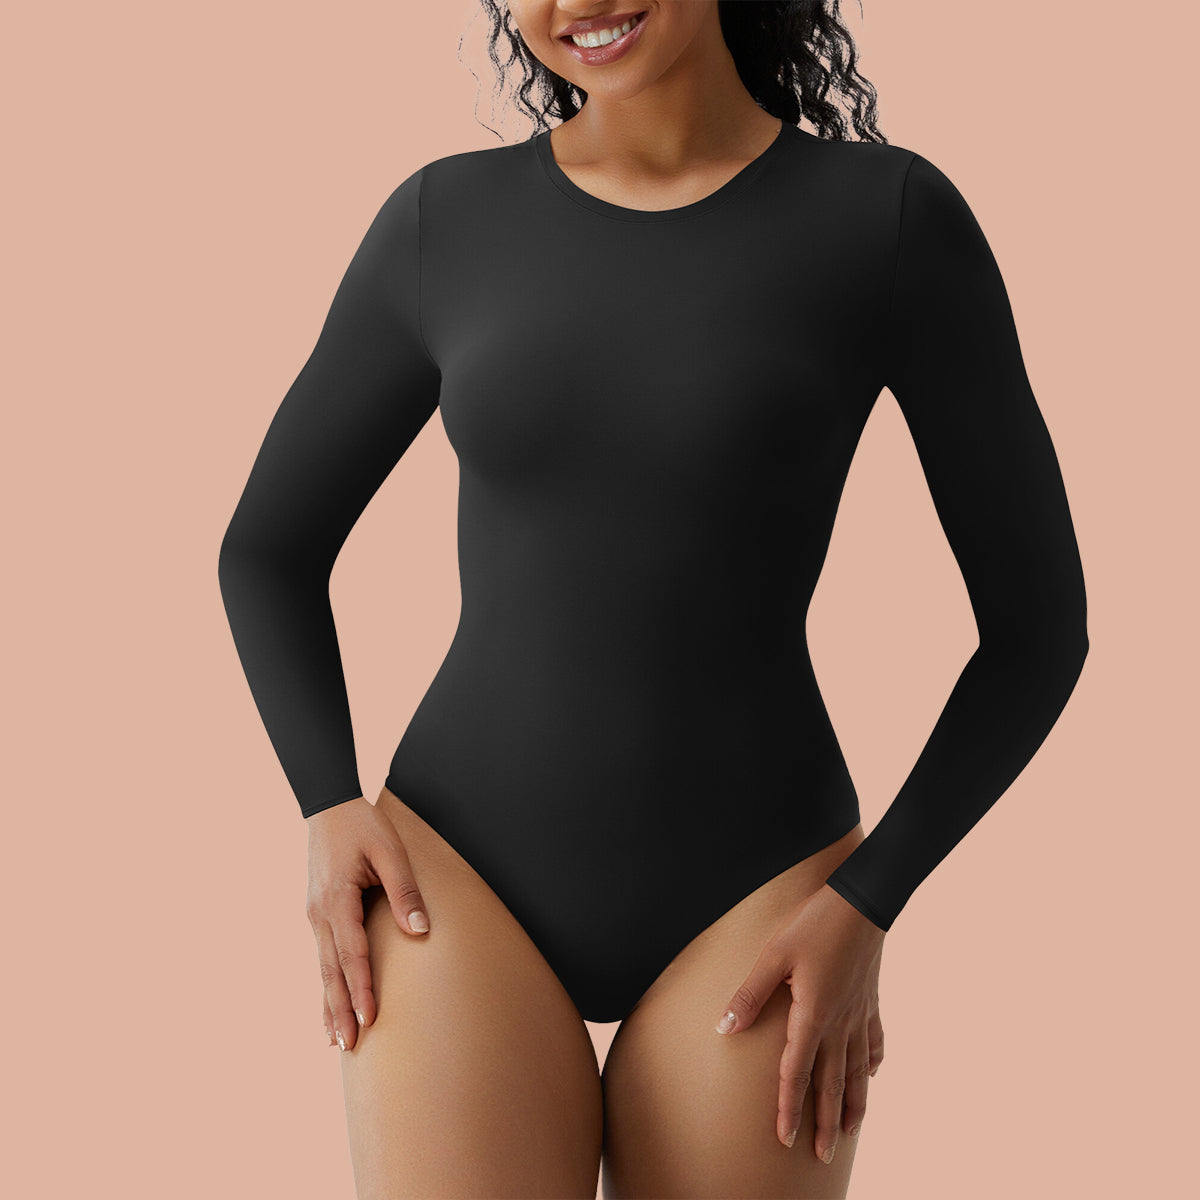 SHAPERX Women's Long Sleeve Bodysuit Fits Everybody Soft V Neck Basic Tops  with Thong